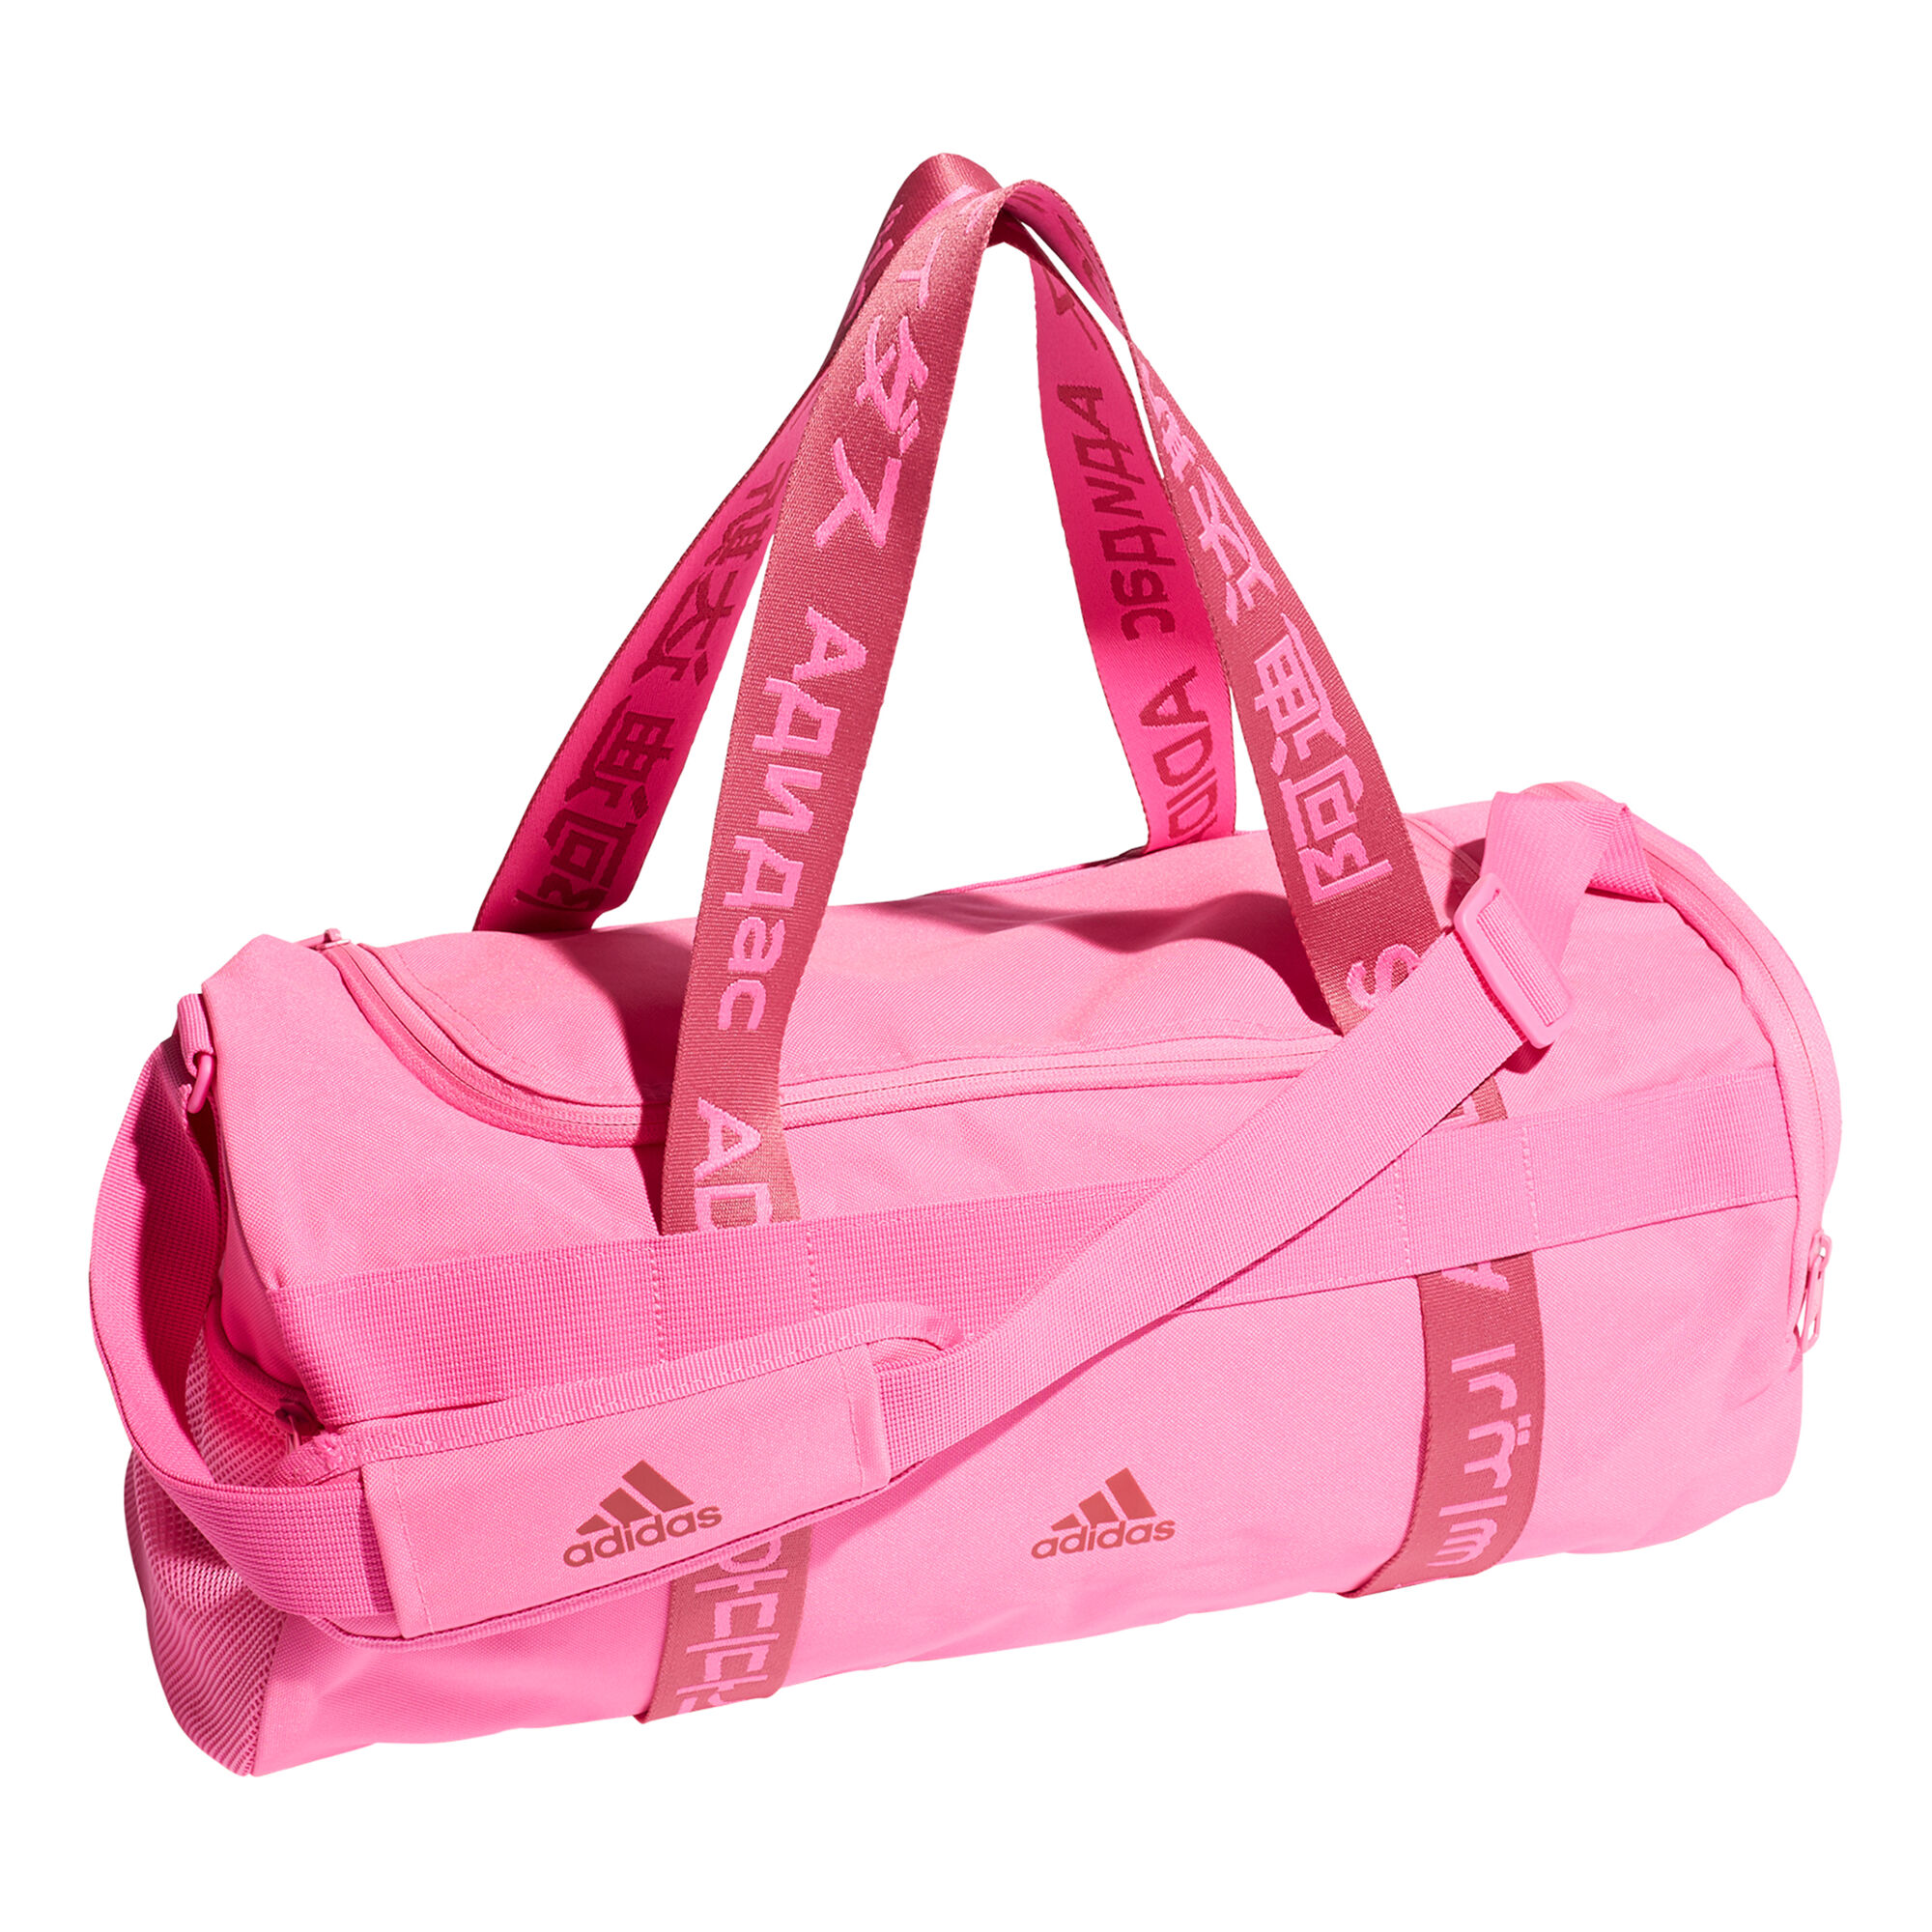 Athletes Point 4 Bag online Pink Sports adidas COM Tennis Buy Duffle |